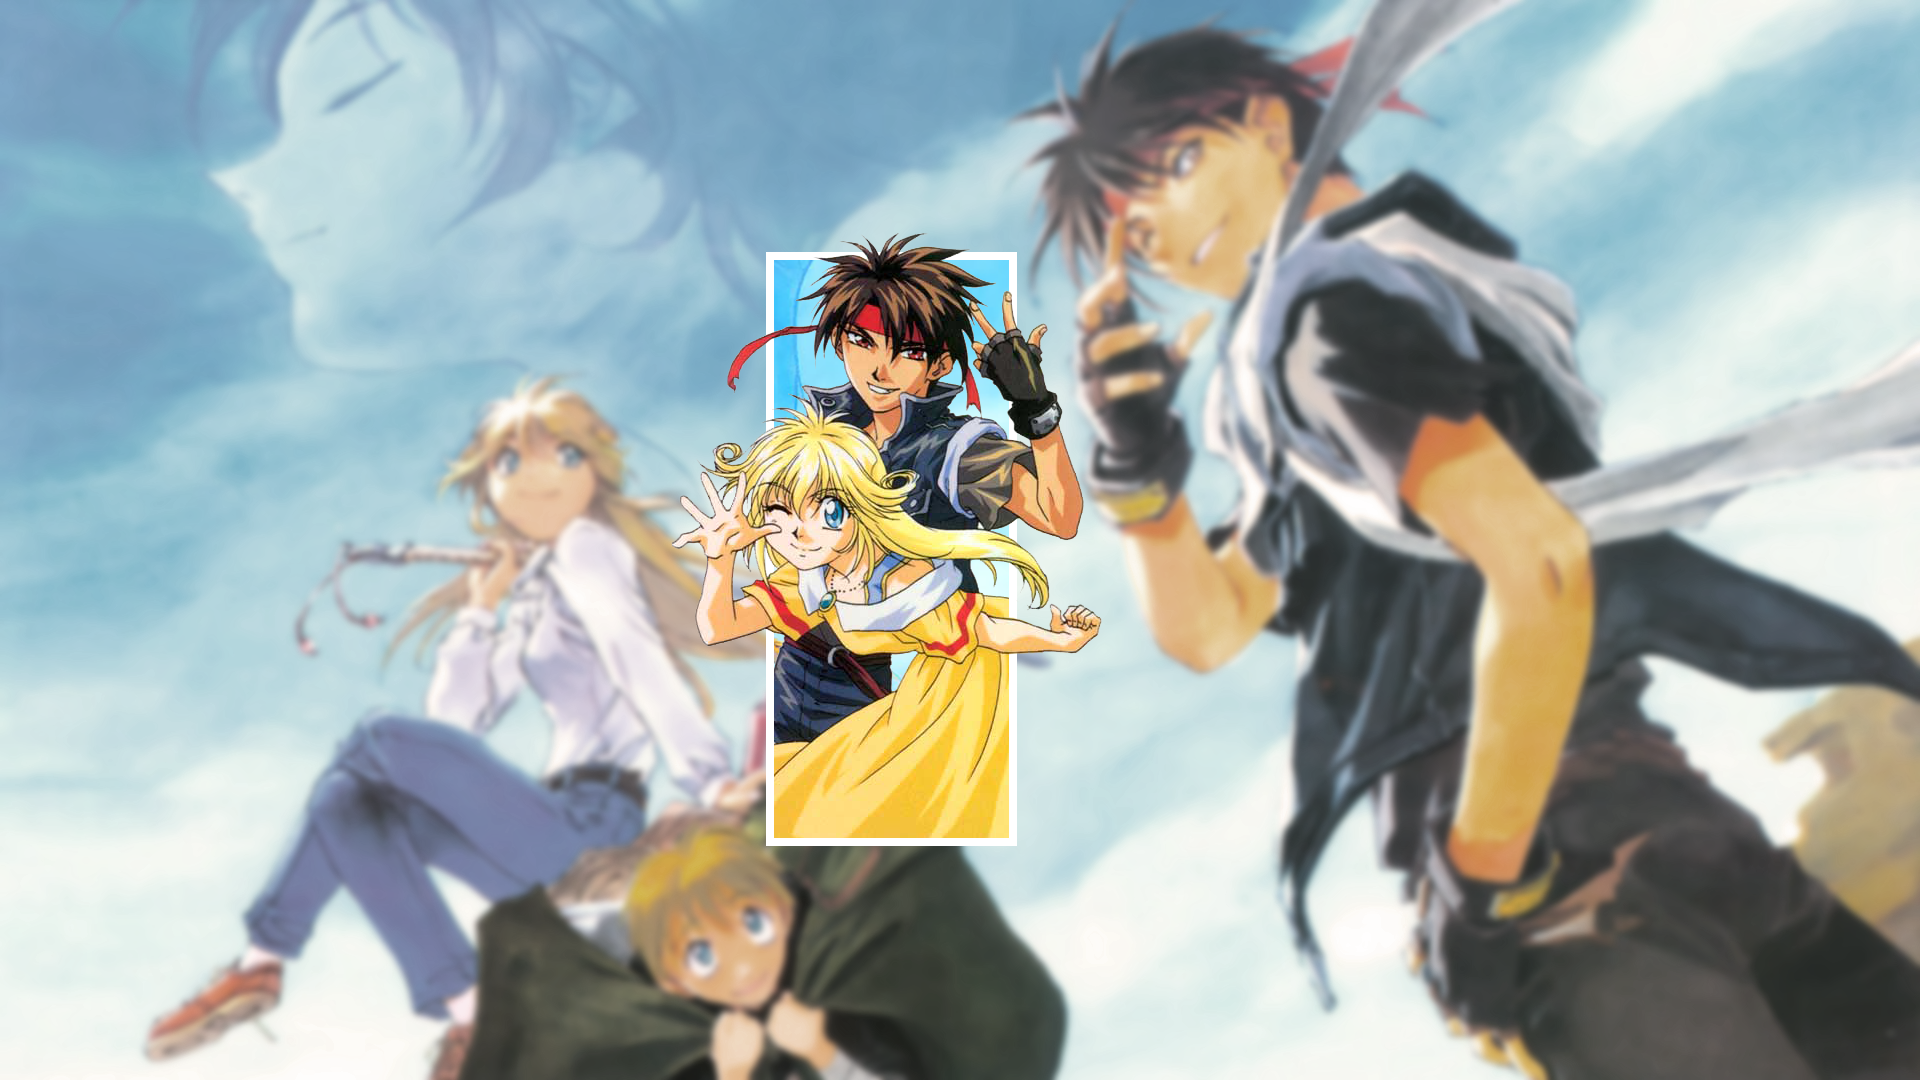 Anime 1920x1080 picture-in-picture anime anime girls anime boys blonde blue eyes dark hair Orphen